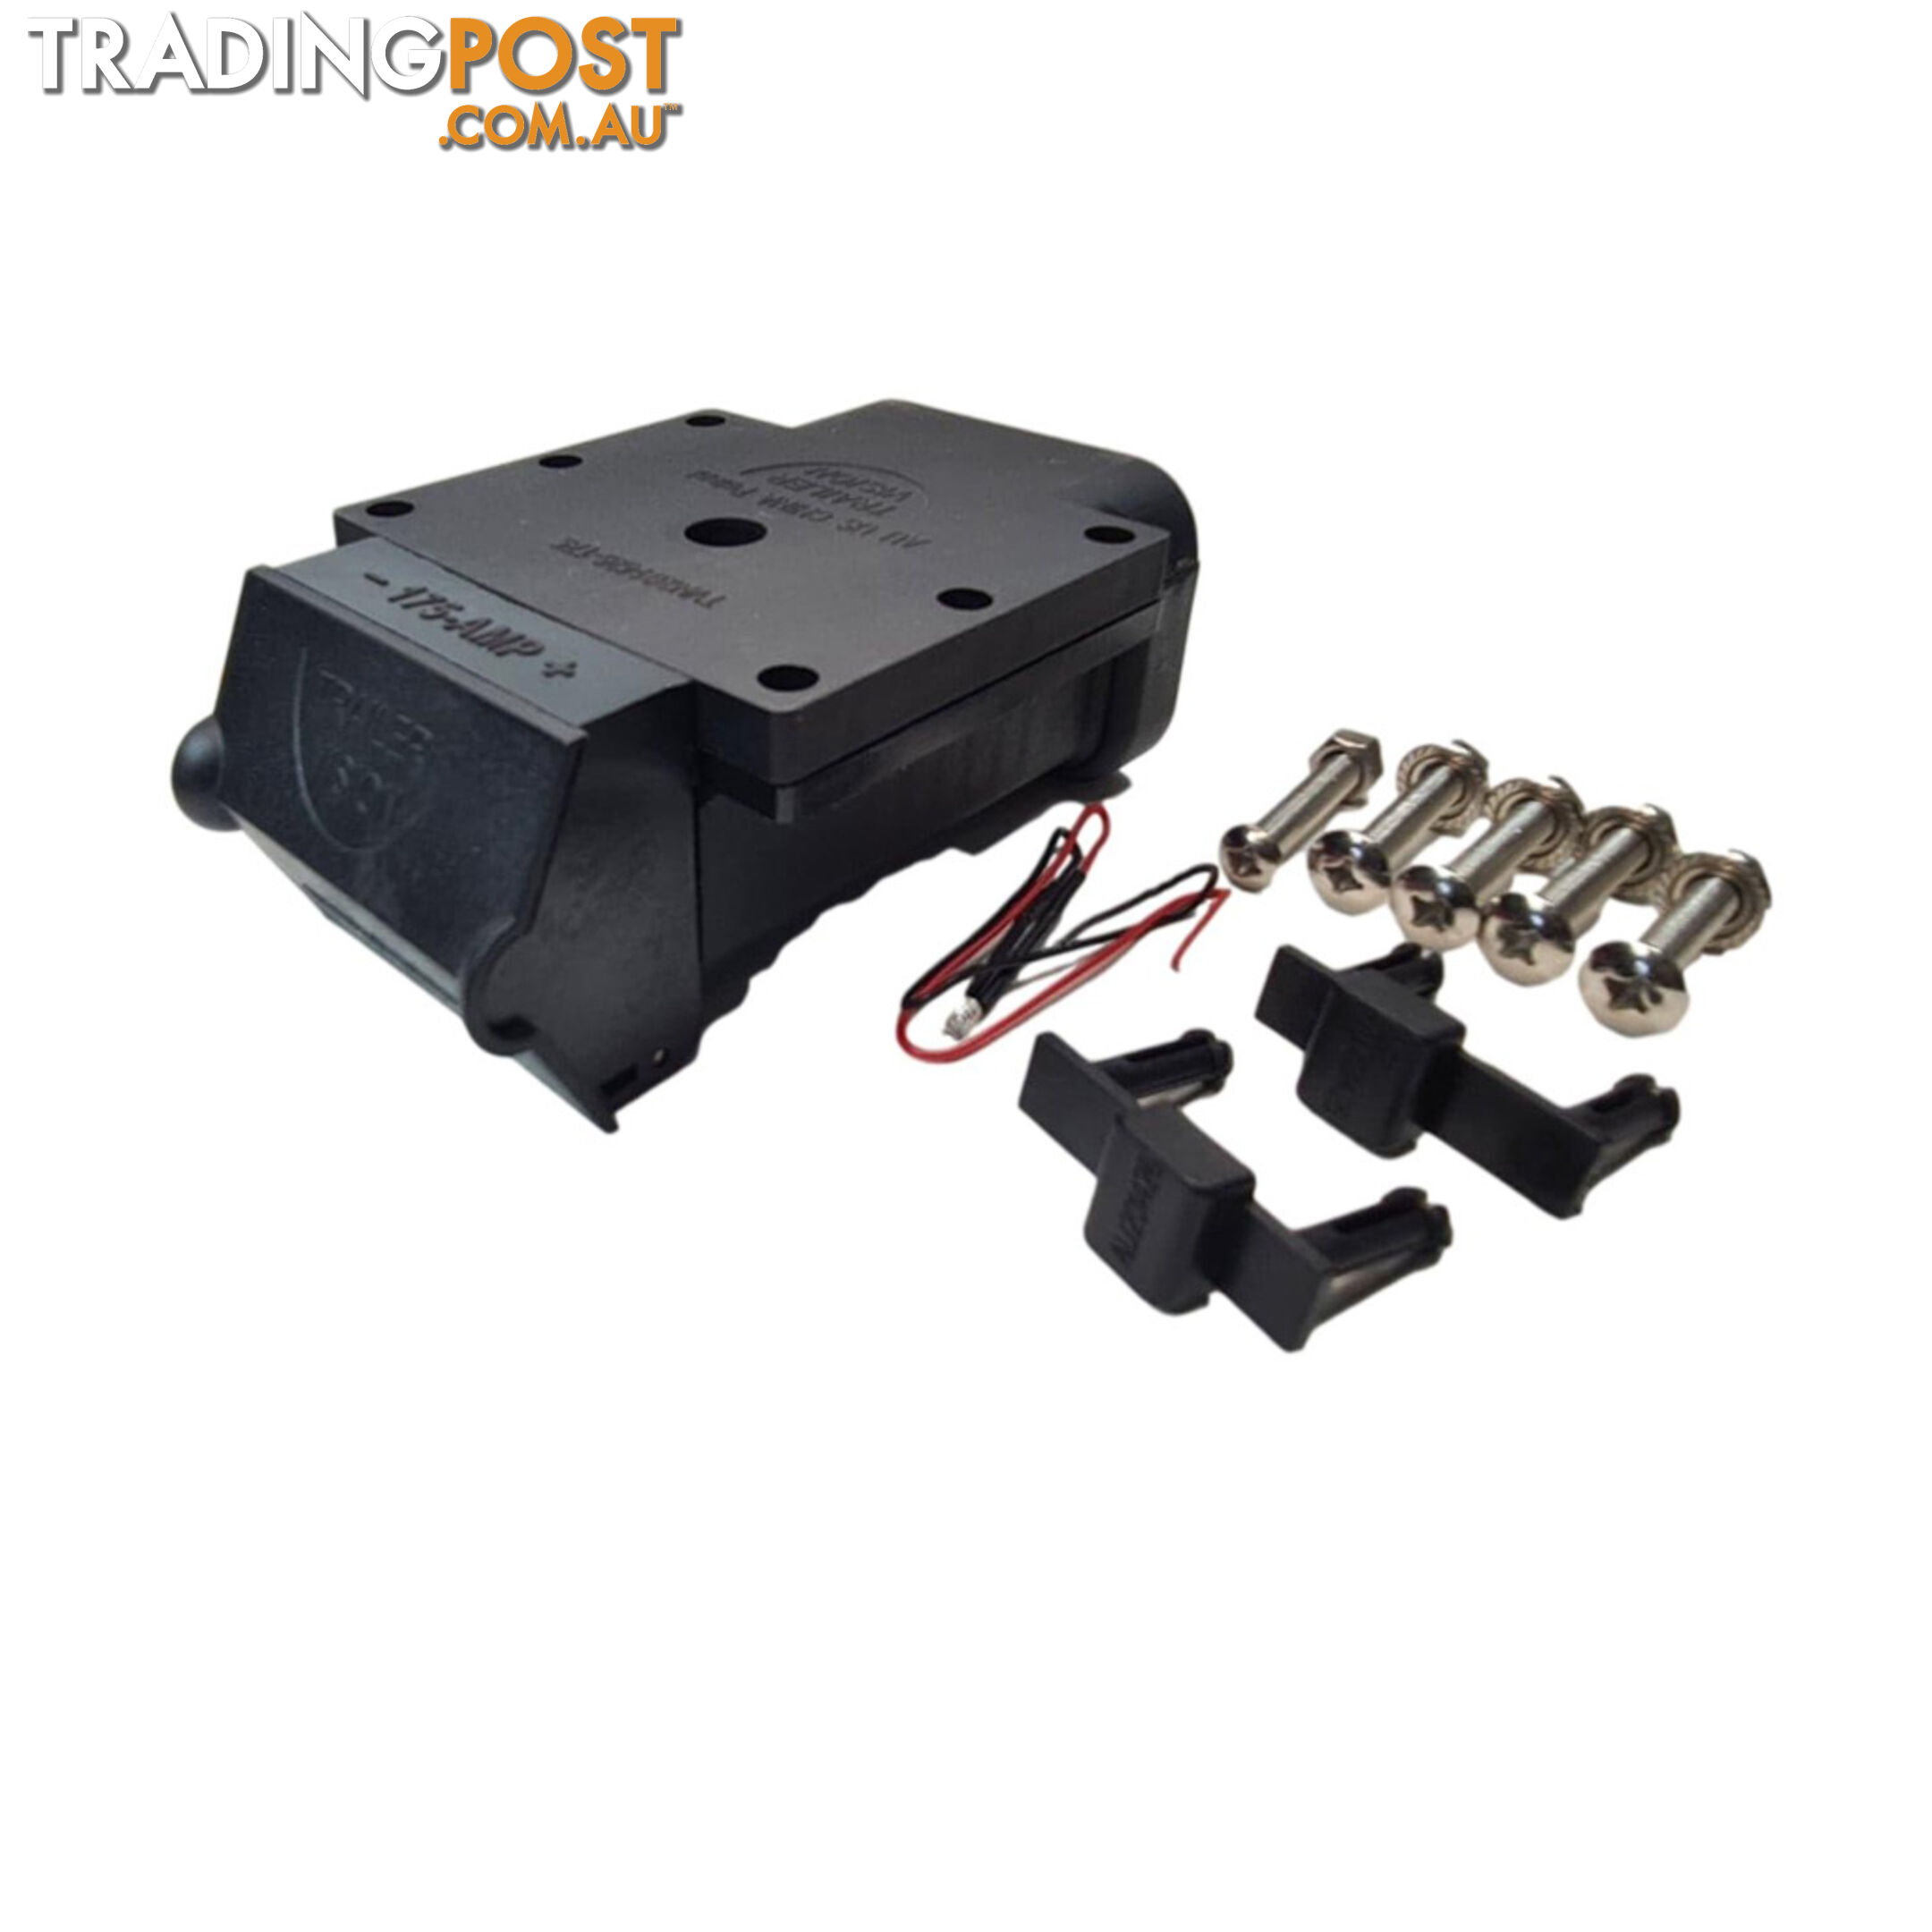 175a Anderson Plug Mounting Kit Connector Cover Assembly with LED Indicator SKU - TVN-201426-175BLACK